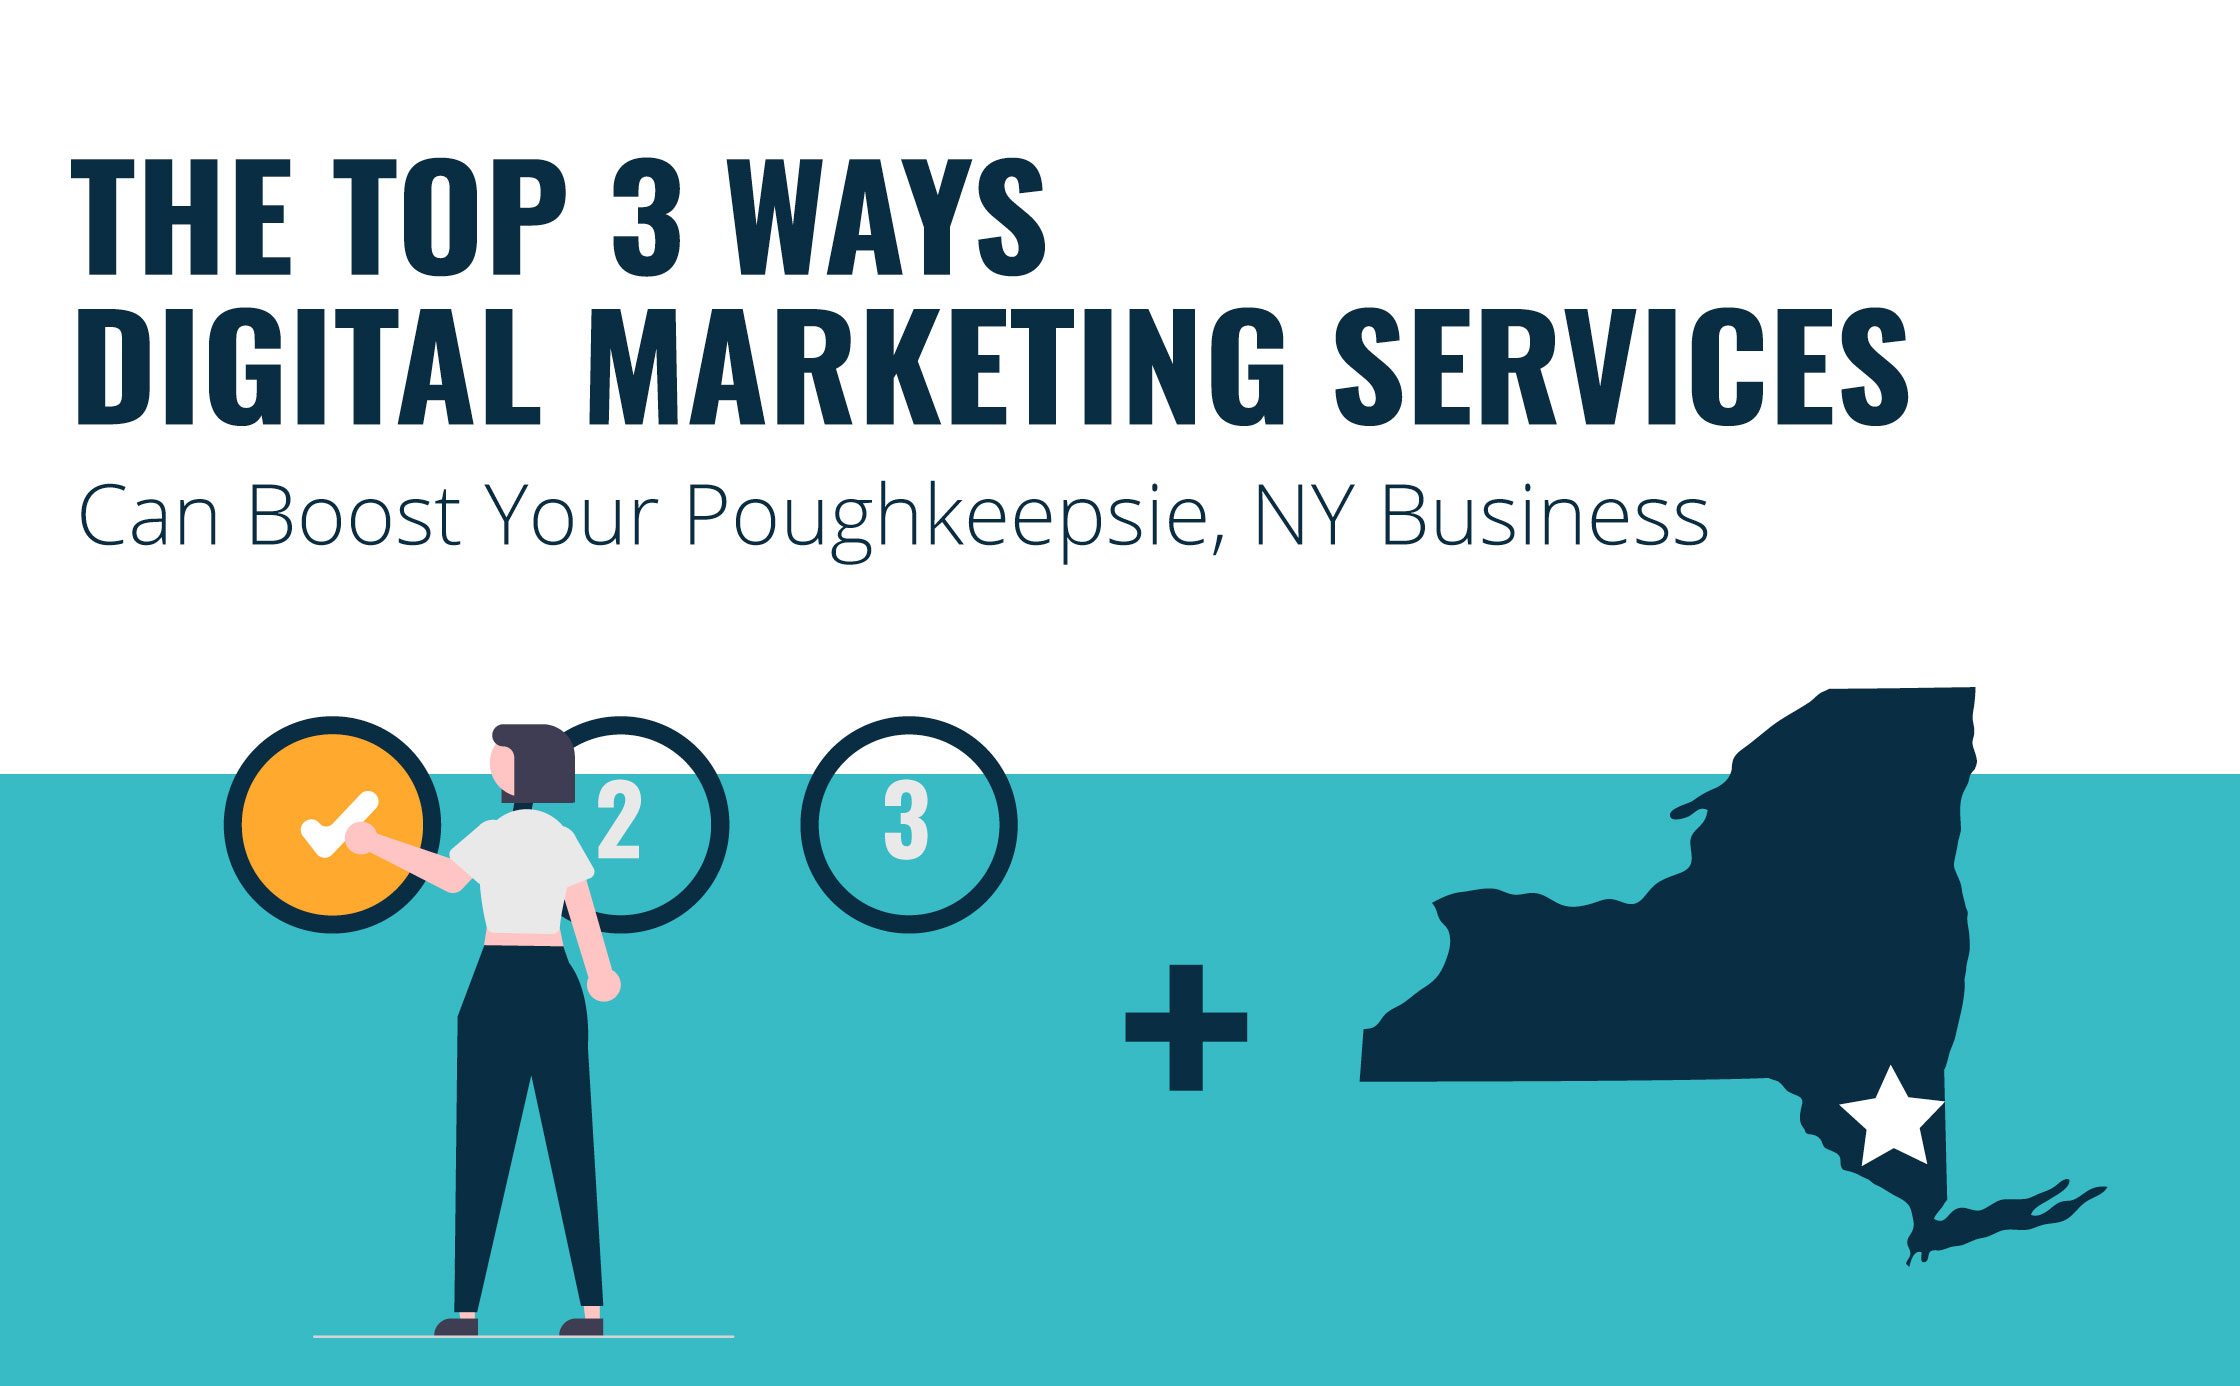 3 Ways Digital Marketing Services Can Boost Your Poughkeepsie, NY Business